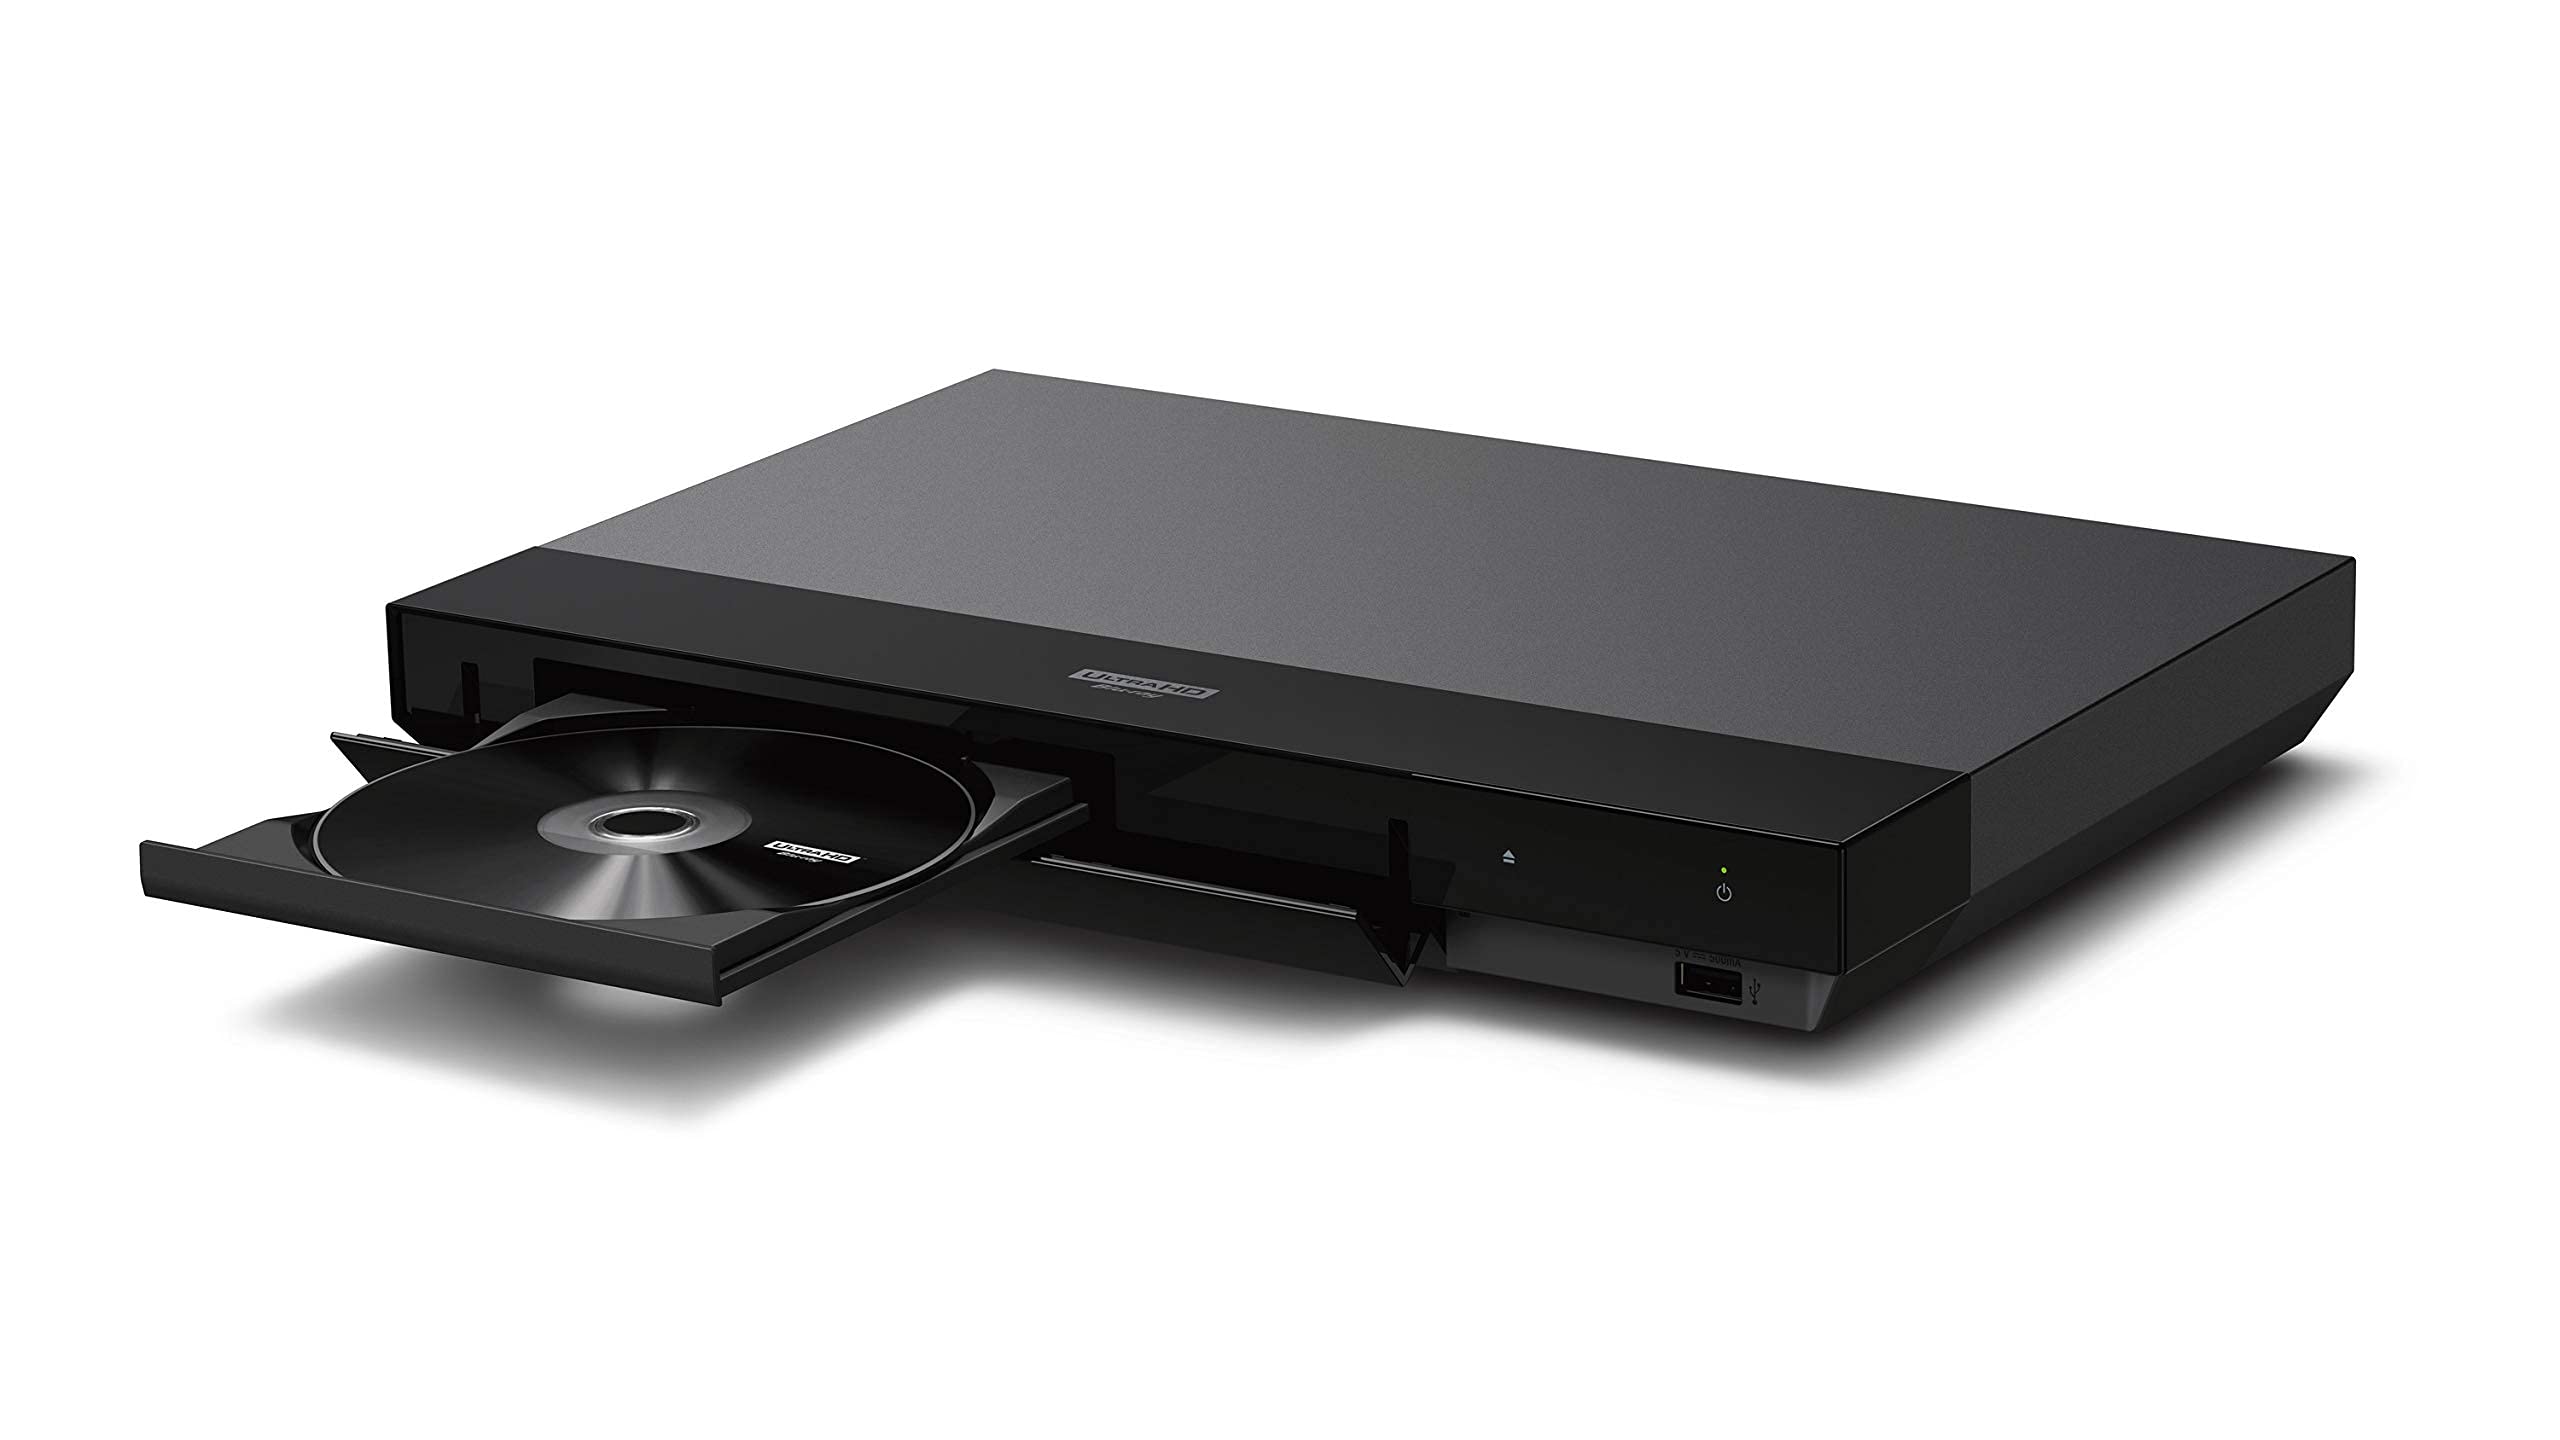 Sony UBP- X700M 4K Ultra HD Home Theater Streaming Blu-ray Player with HDMI Cable (Renewed)